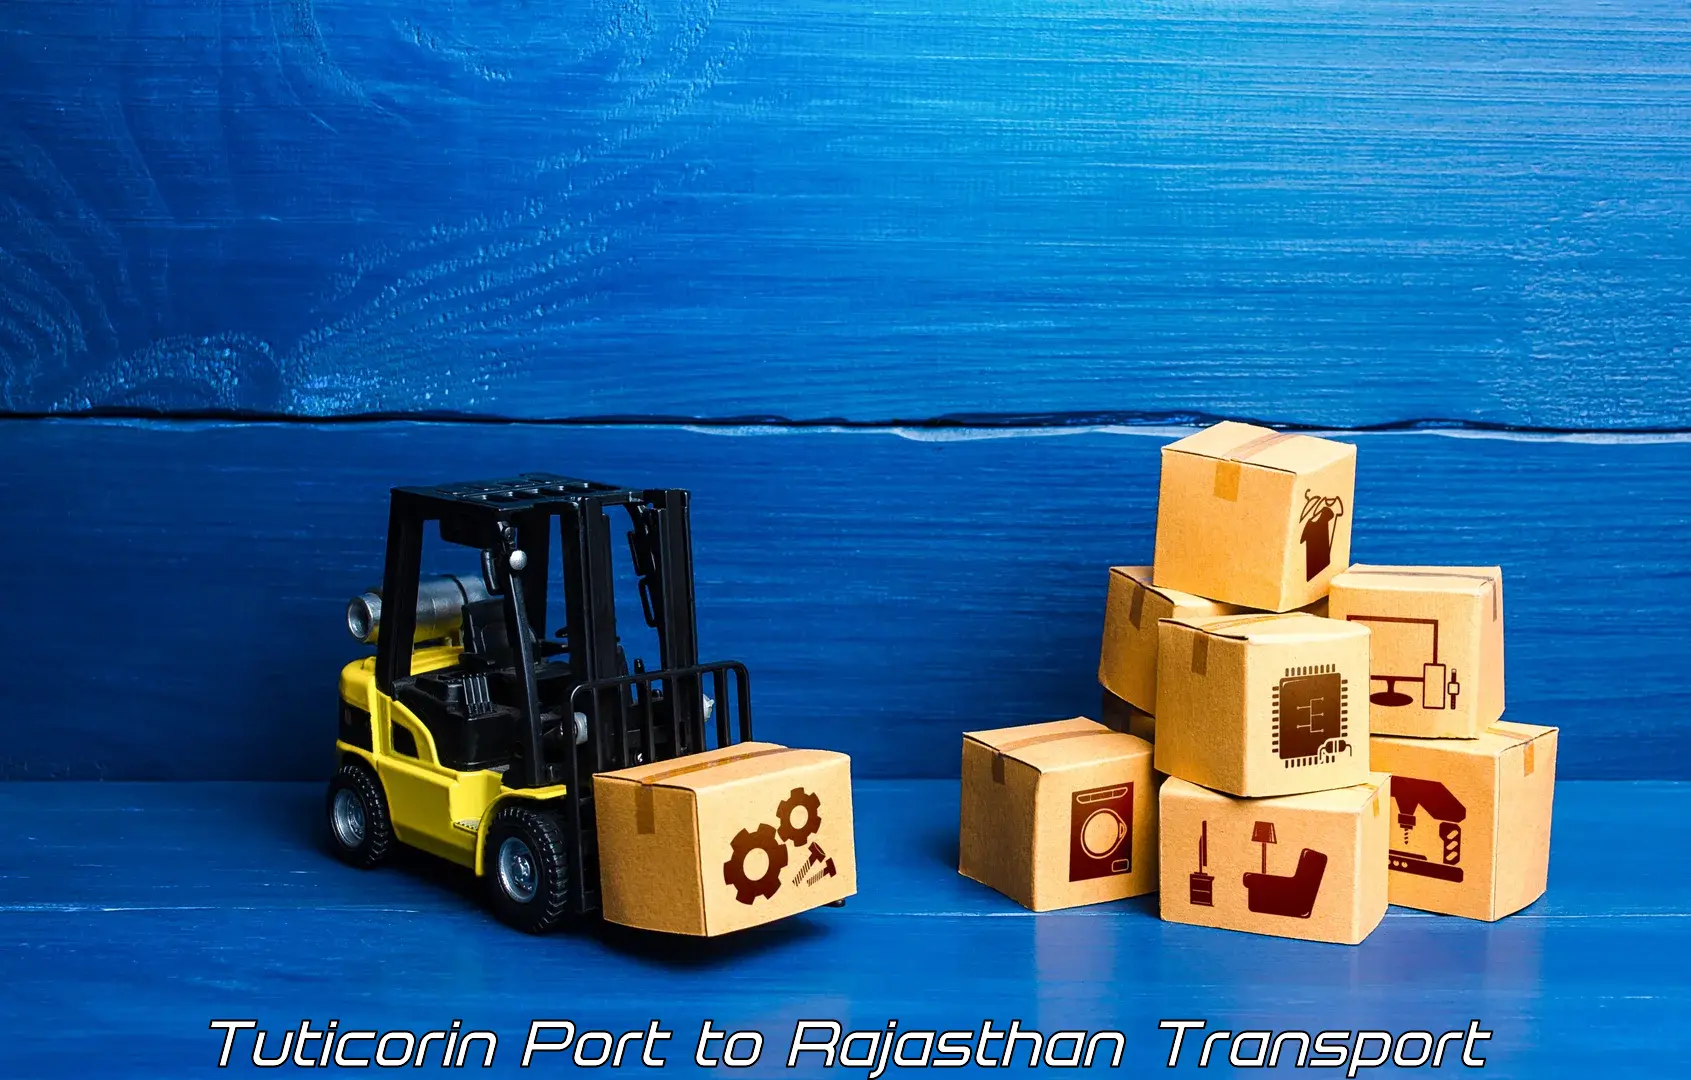 Container transportation services Tuticorin Port to Rajasthan